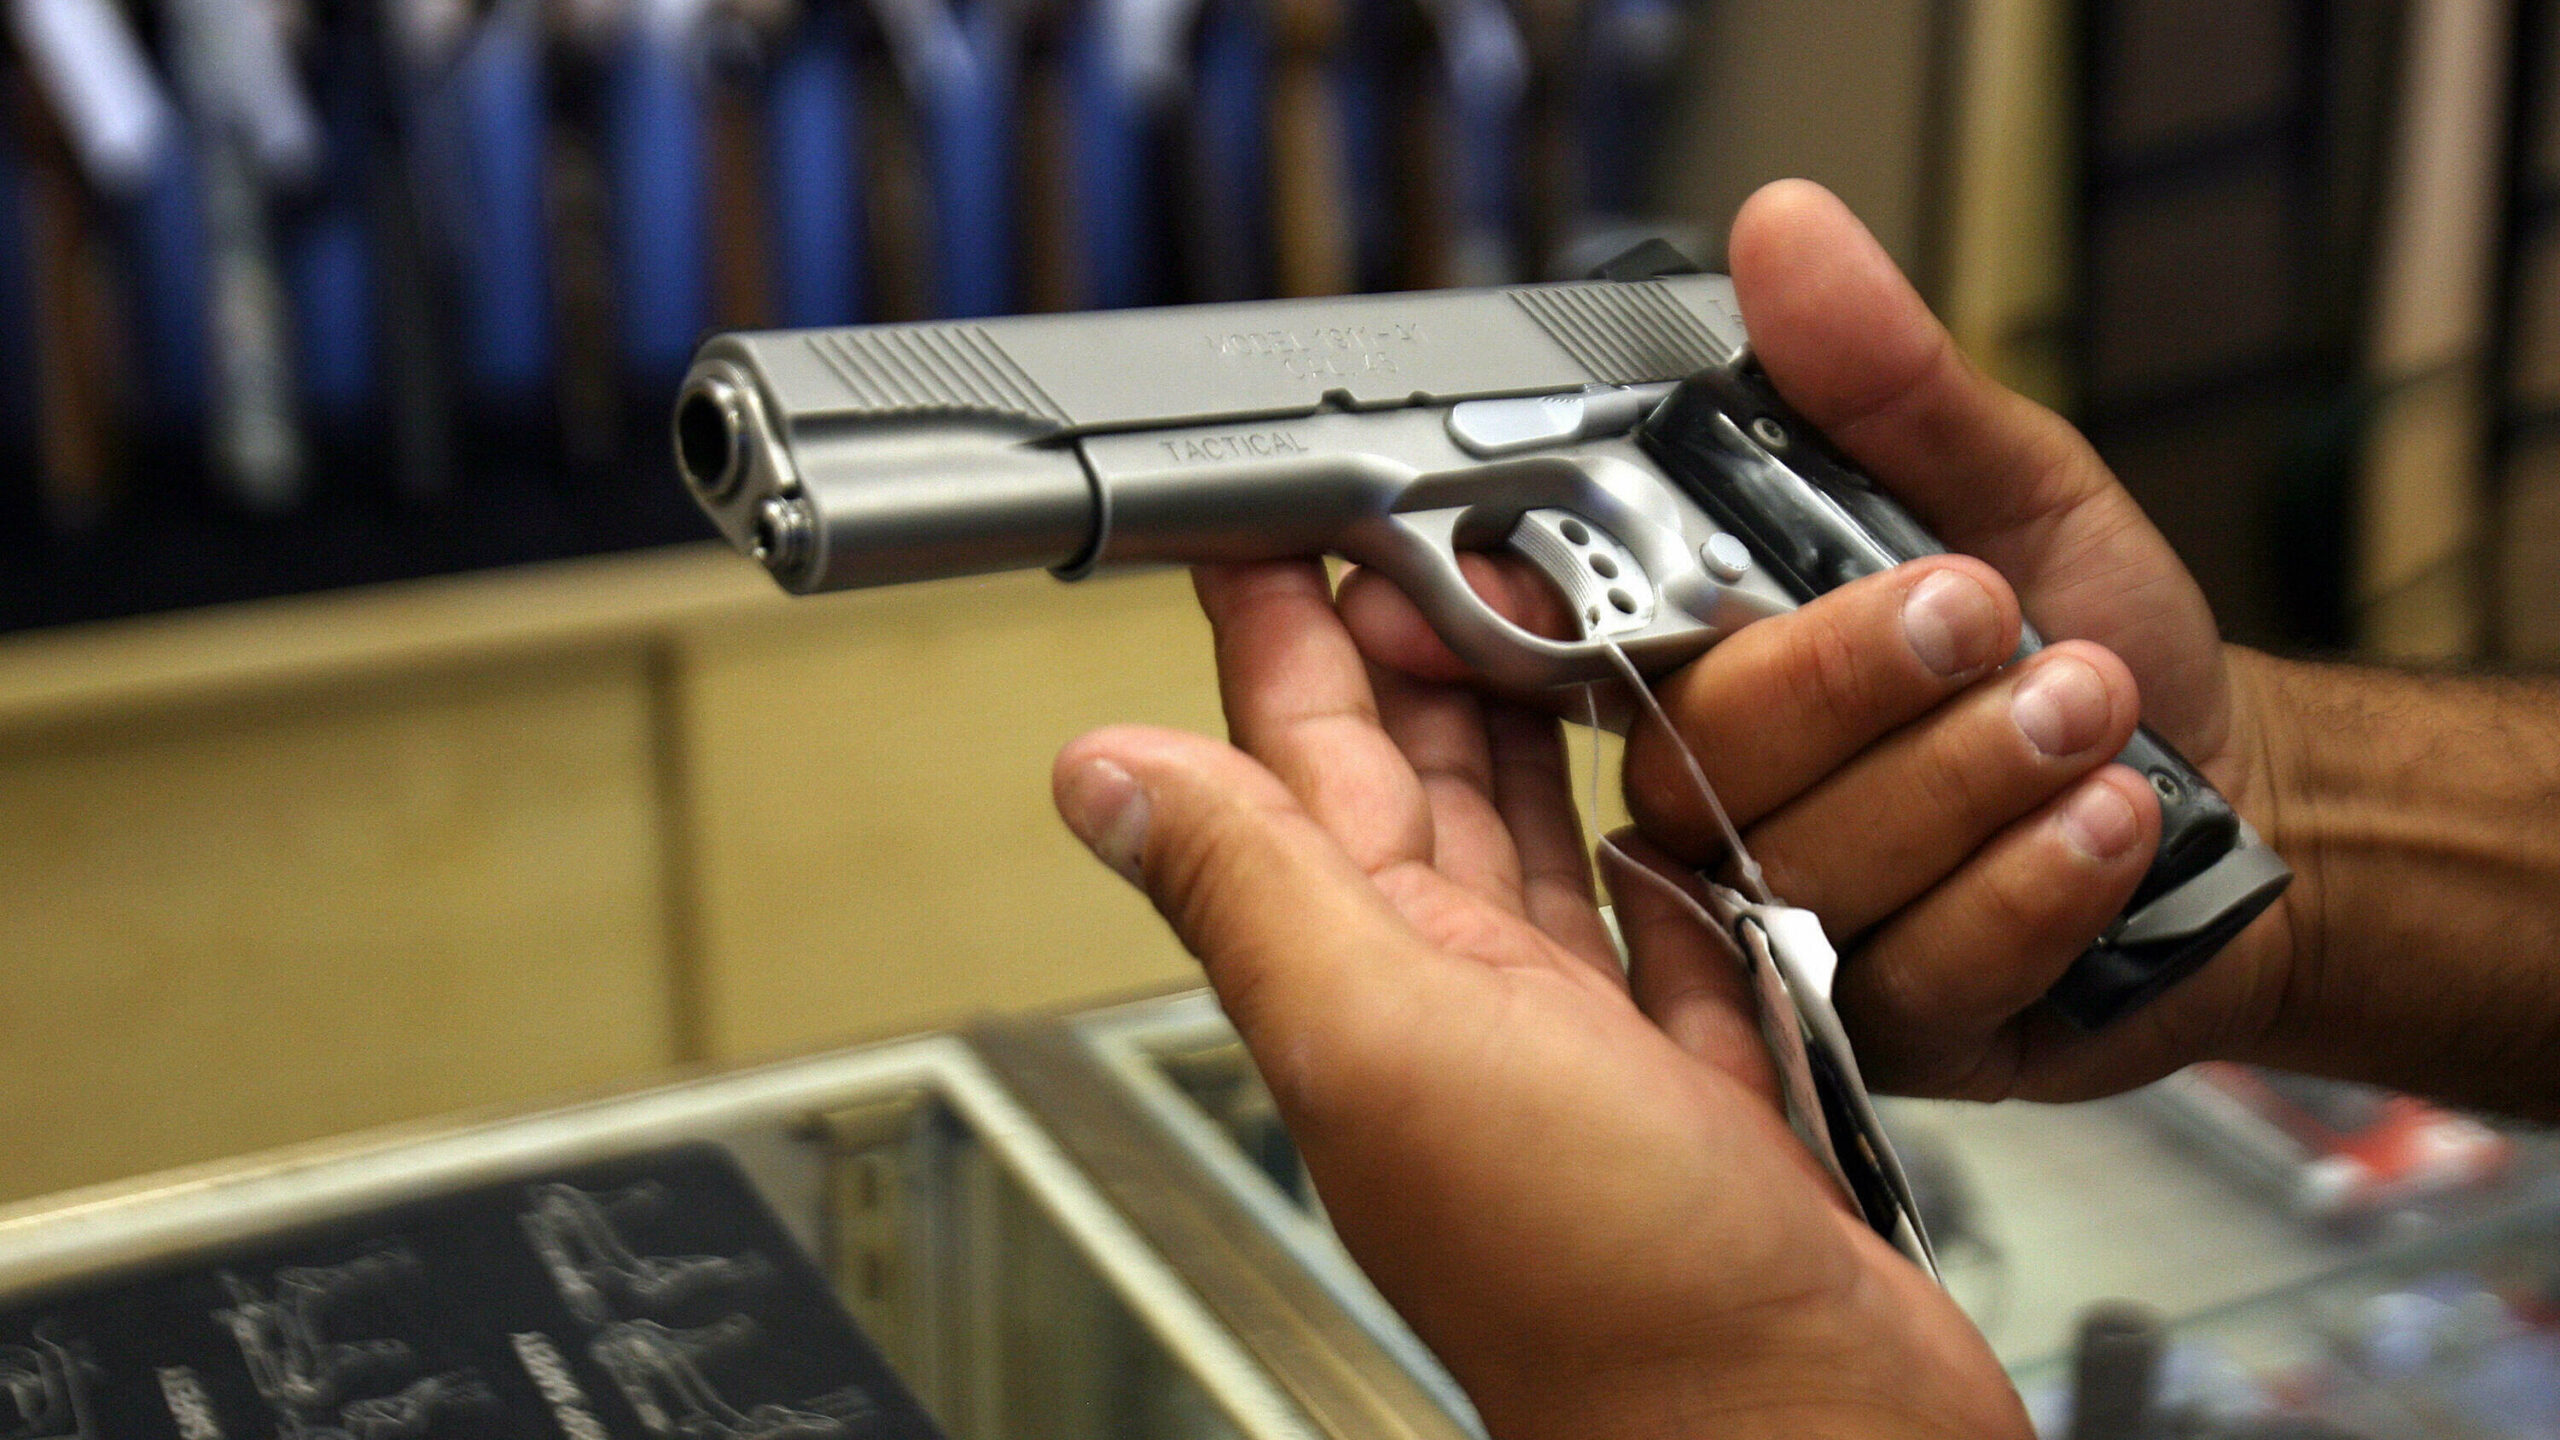 A new California law restricts carrying guns in public — testing the Second Amendment